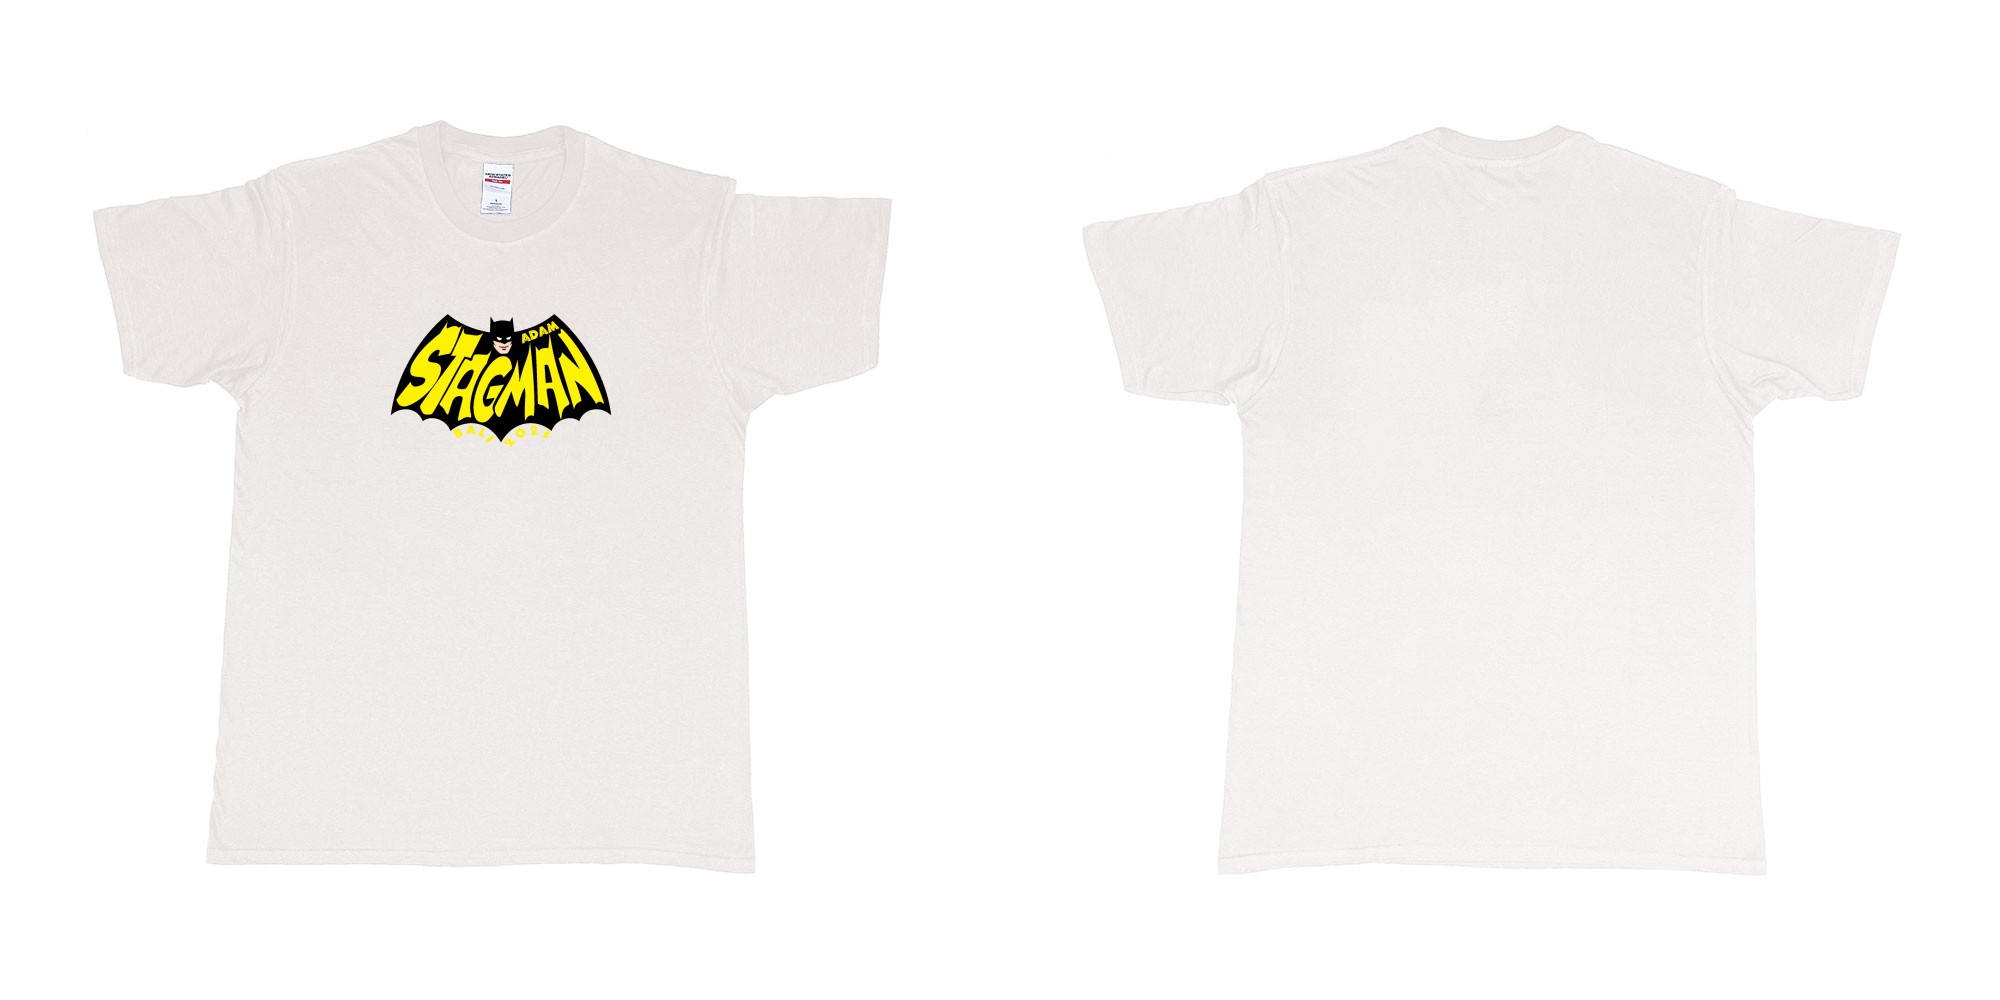 Custom tshirt design Batman StagMan Old School in fabric color white choice your own text made in Bali by The Pirate Way